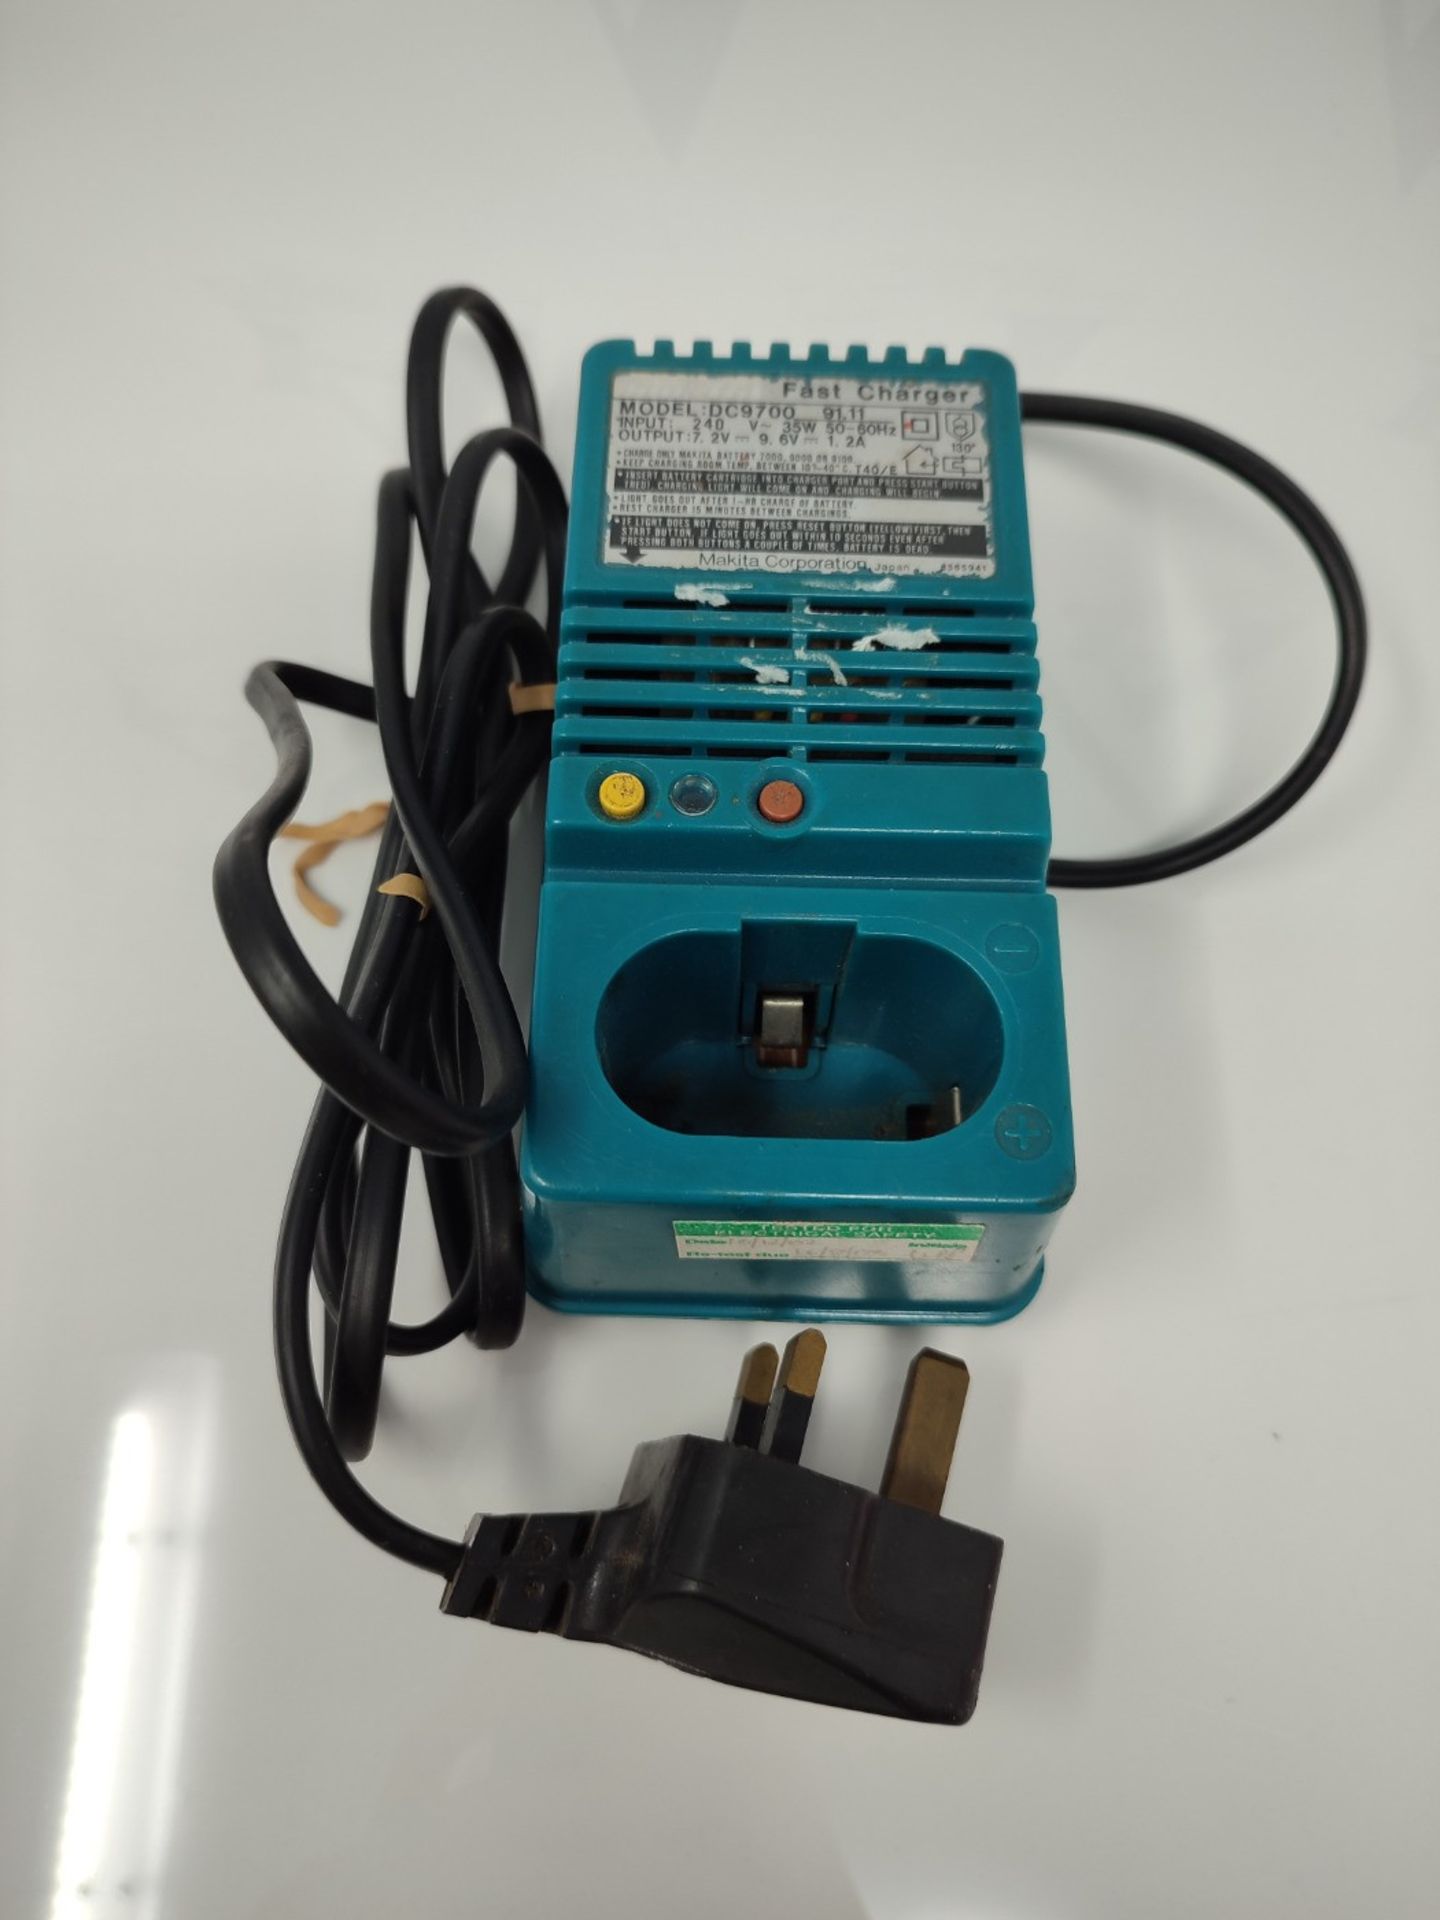 Makita DC9700 fast charger - Image 2 of 2